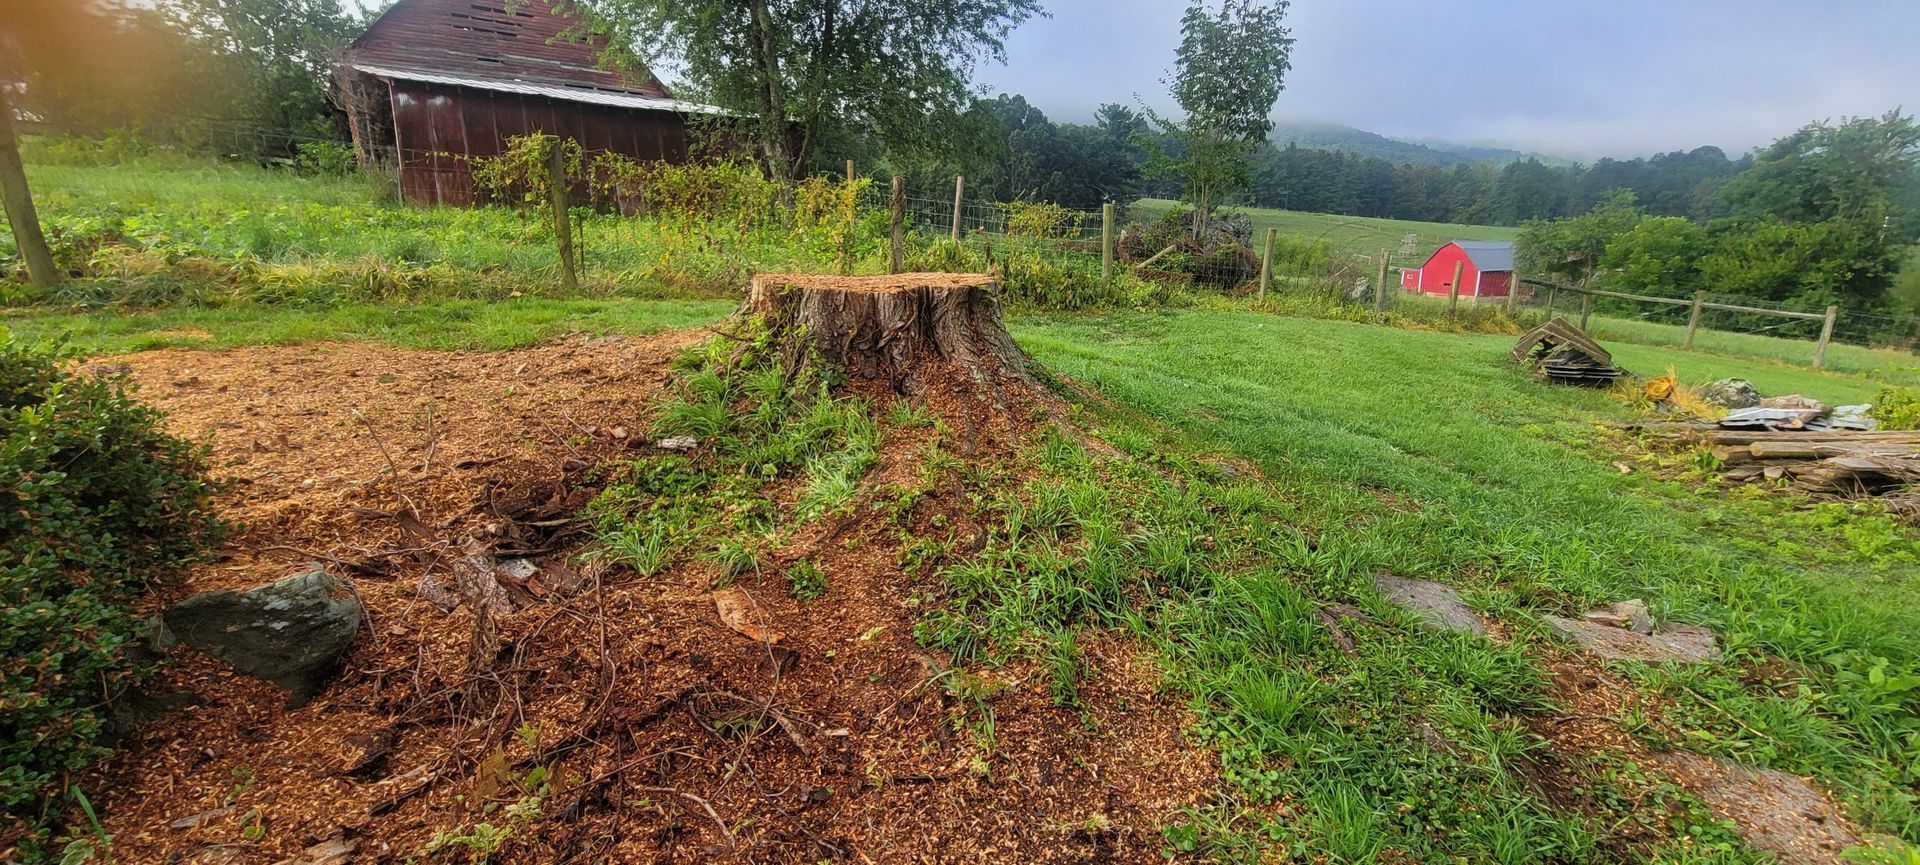 stump grinding, stump removal, Tree cutting, debris clean up